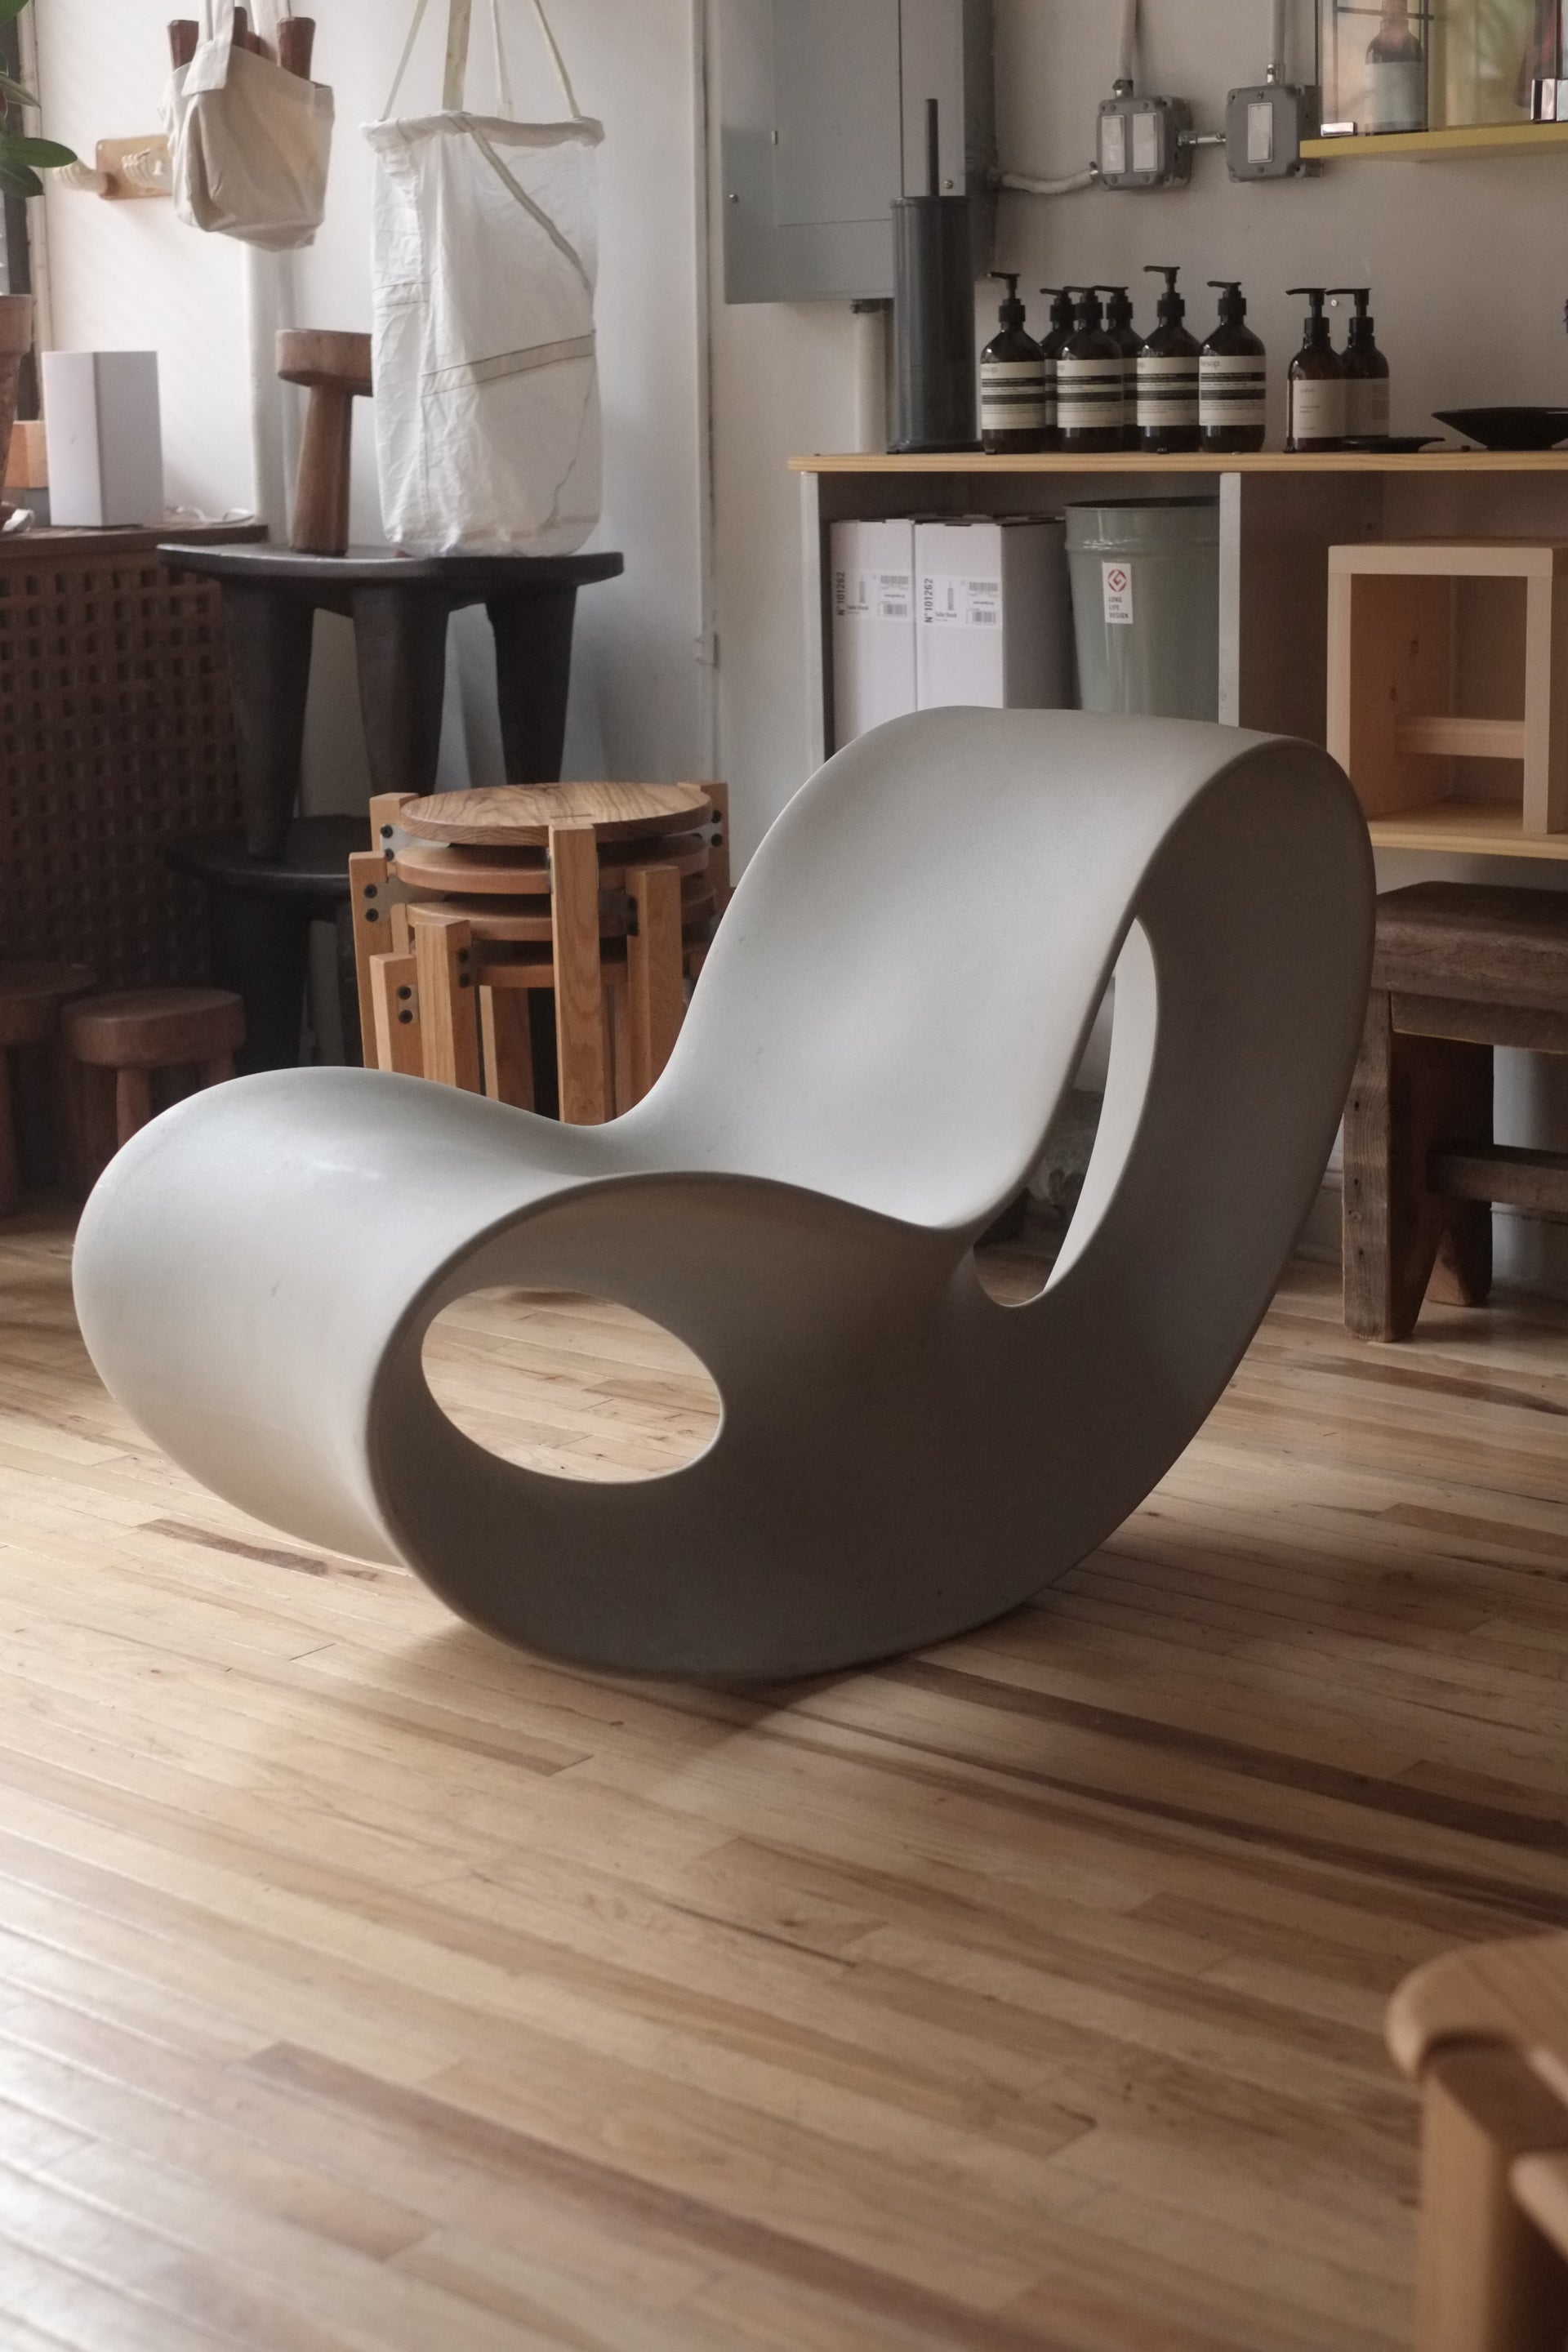 RENT: Voido Rocker by Ron Arad for Magis